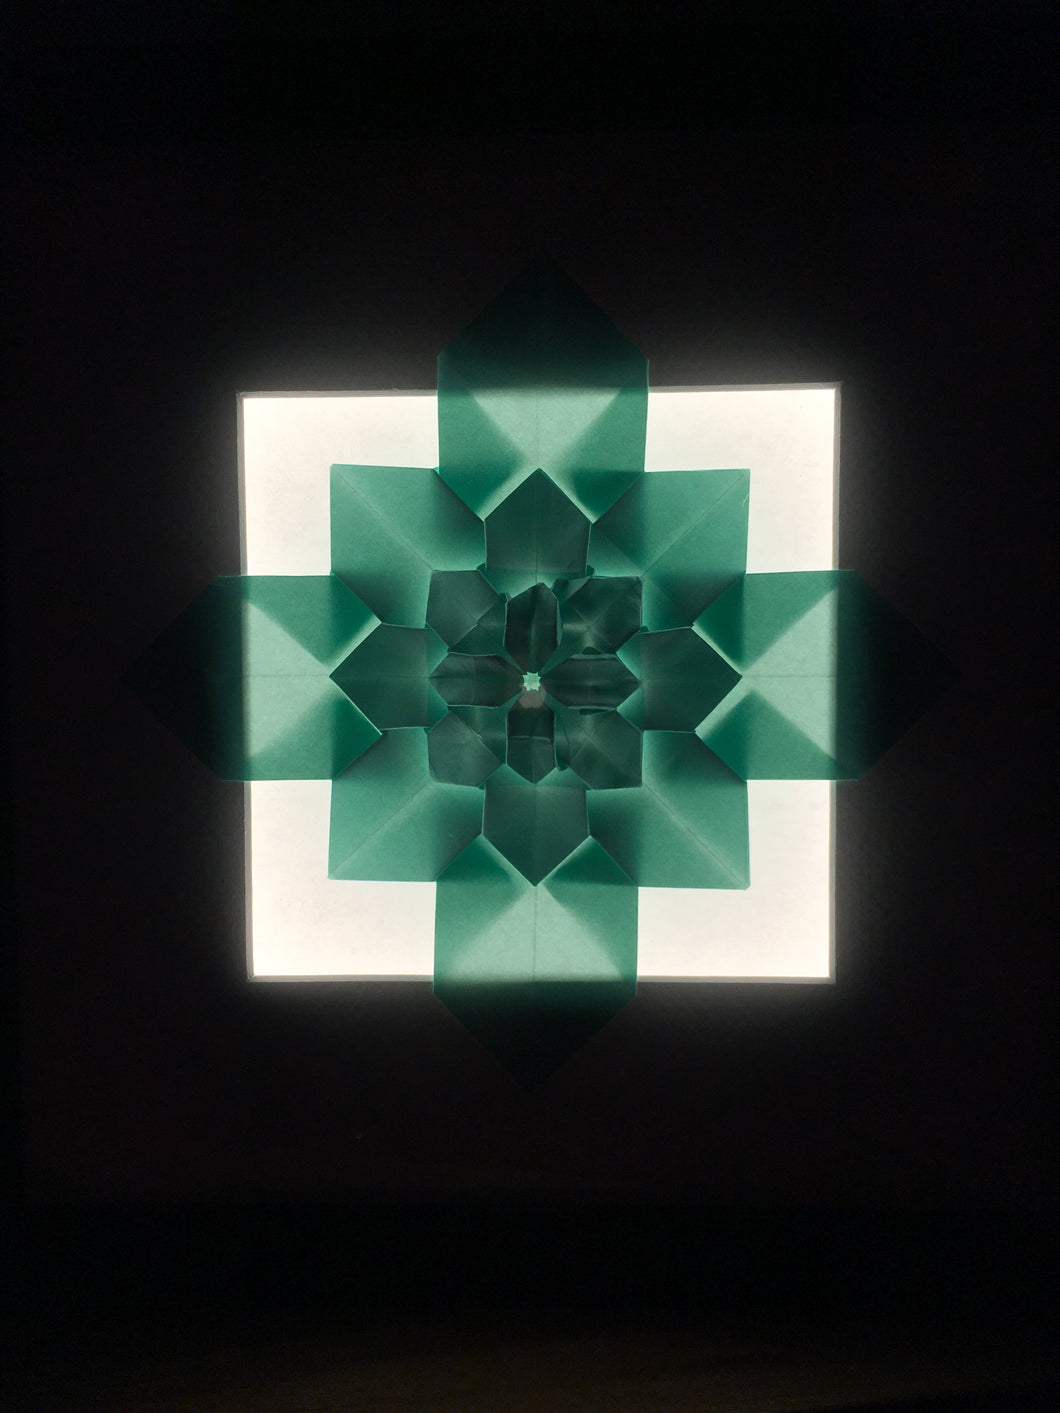 LED Origami Wall Art made with Japanese Paper that Lights Up